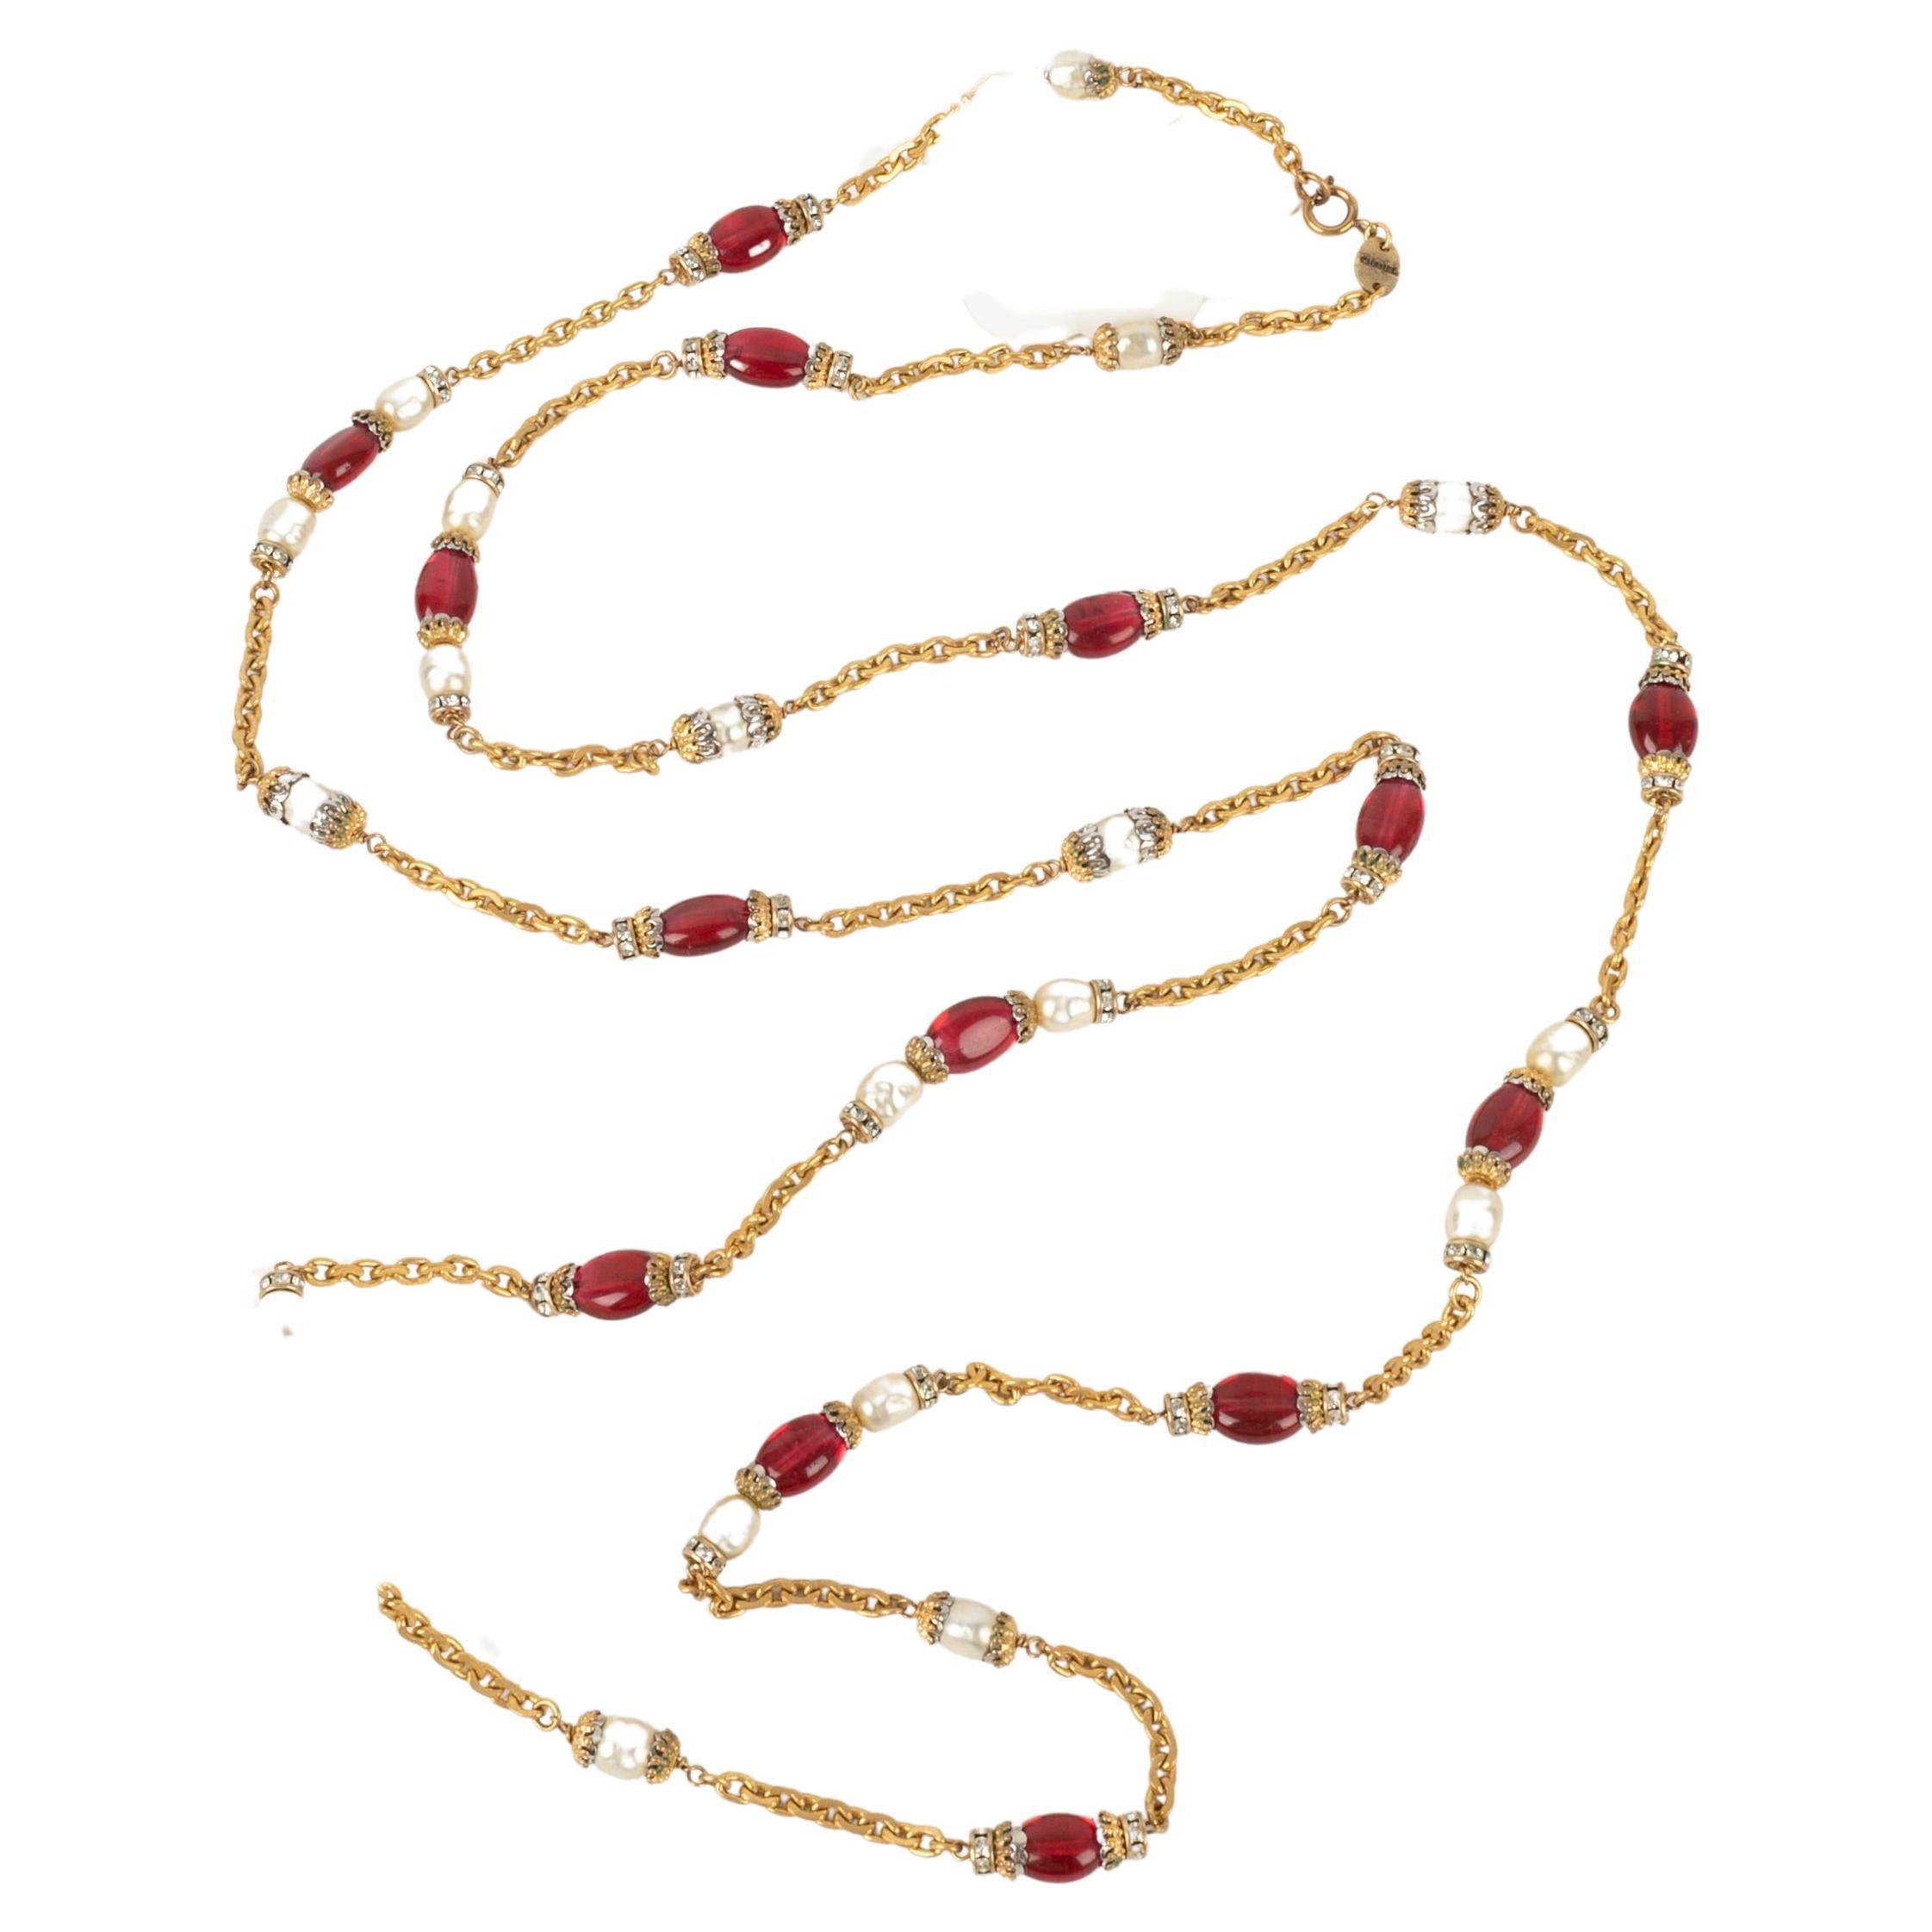 Chanel - Golden metal sautoir / necklace with rhinestone rings, pearly beads, and red glass pearls.

Additional information:
Condition: Very good condition
Dimensions: Length: 155 cm

Seller Reference: CB146
